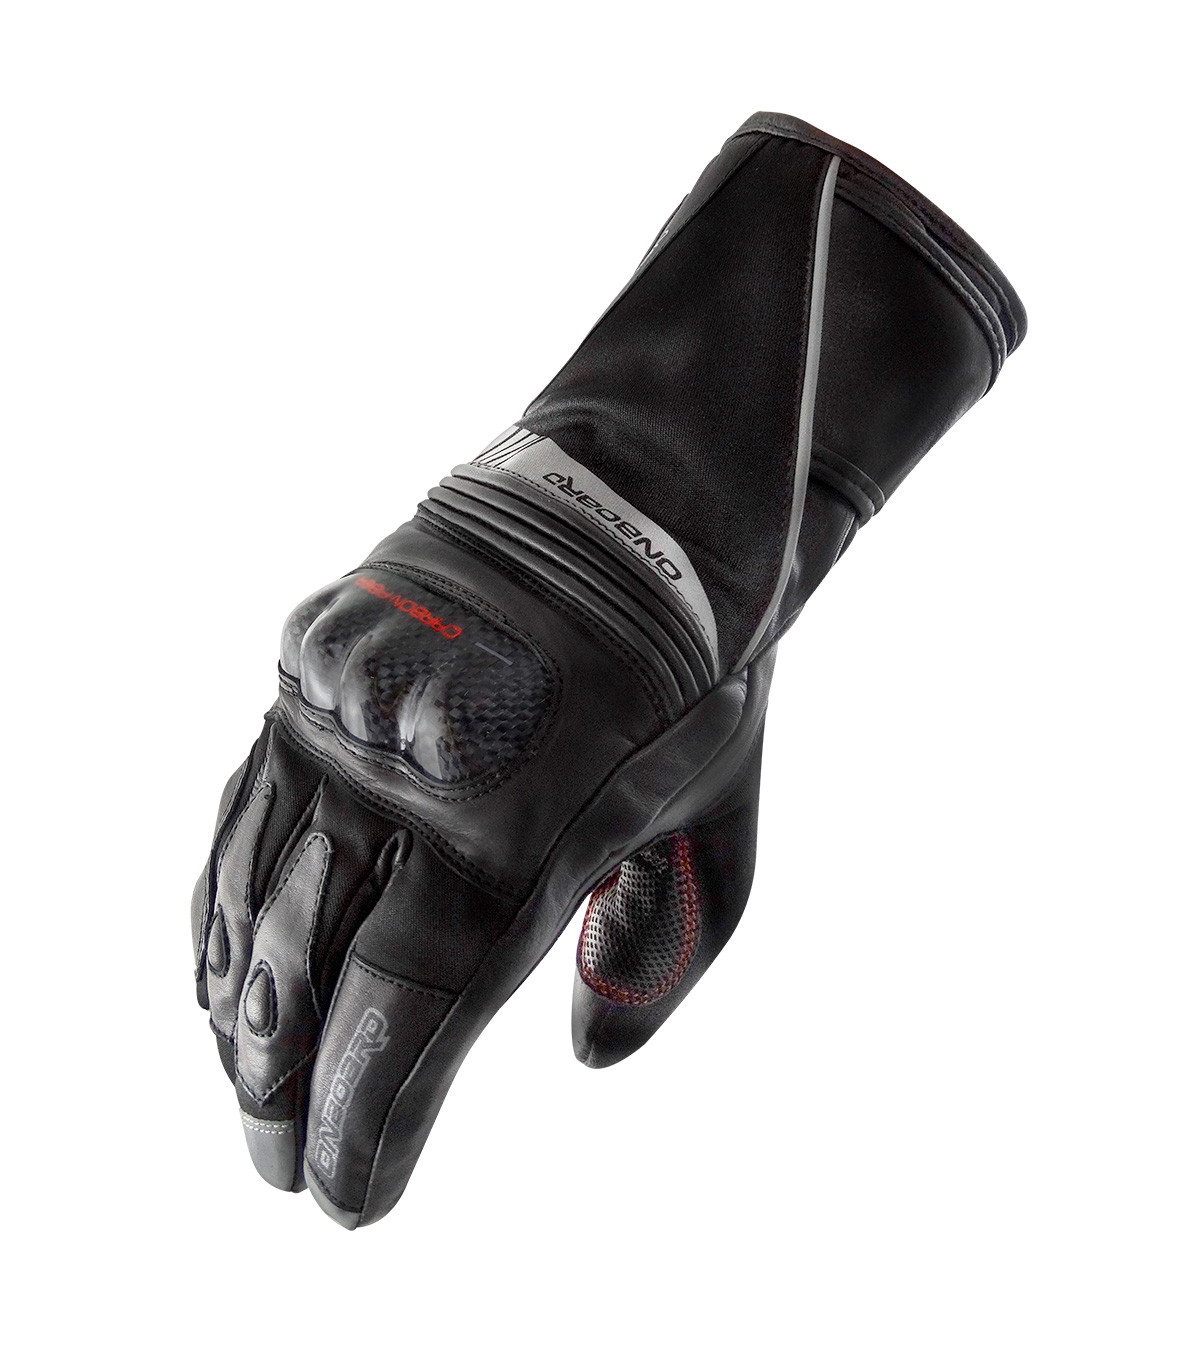 Guantes moto Invierno Onboard, Shyness 2. Comprar guante impermeable.